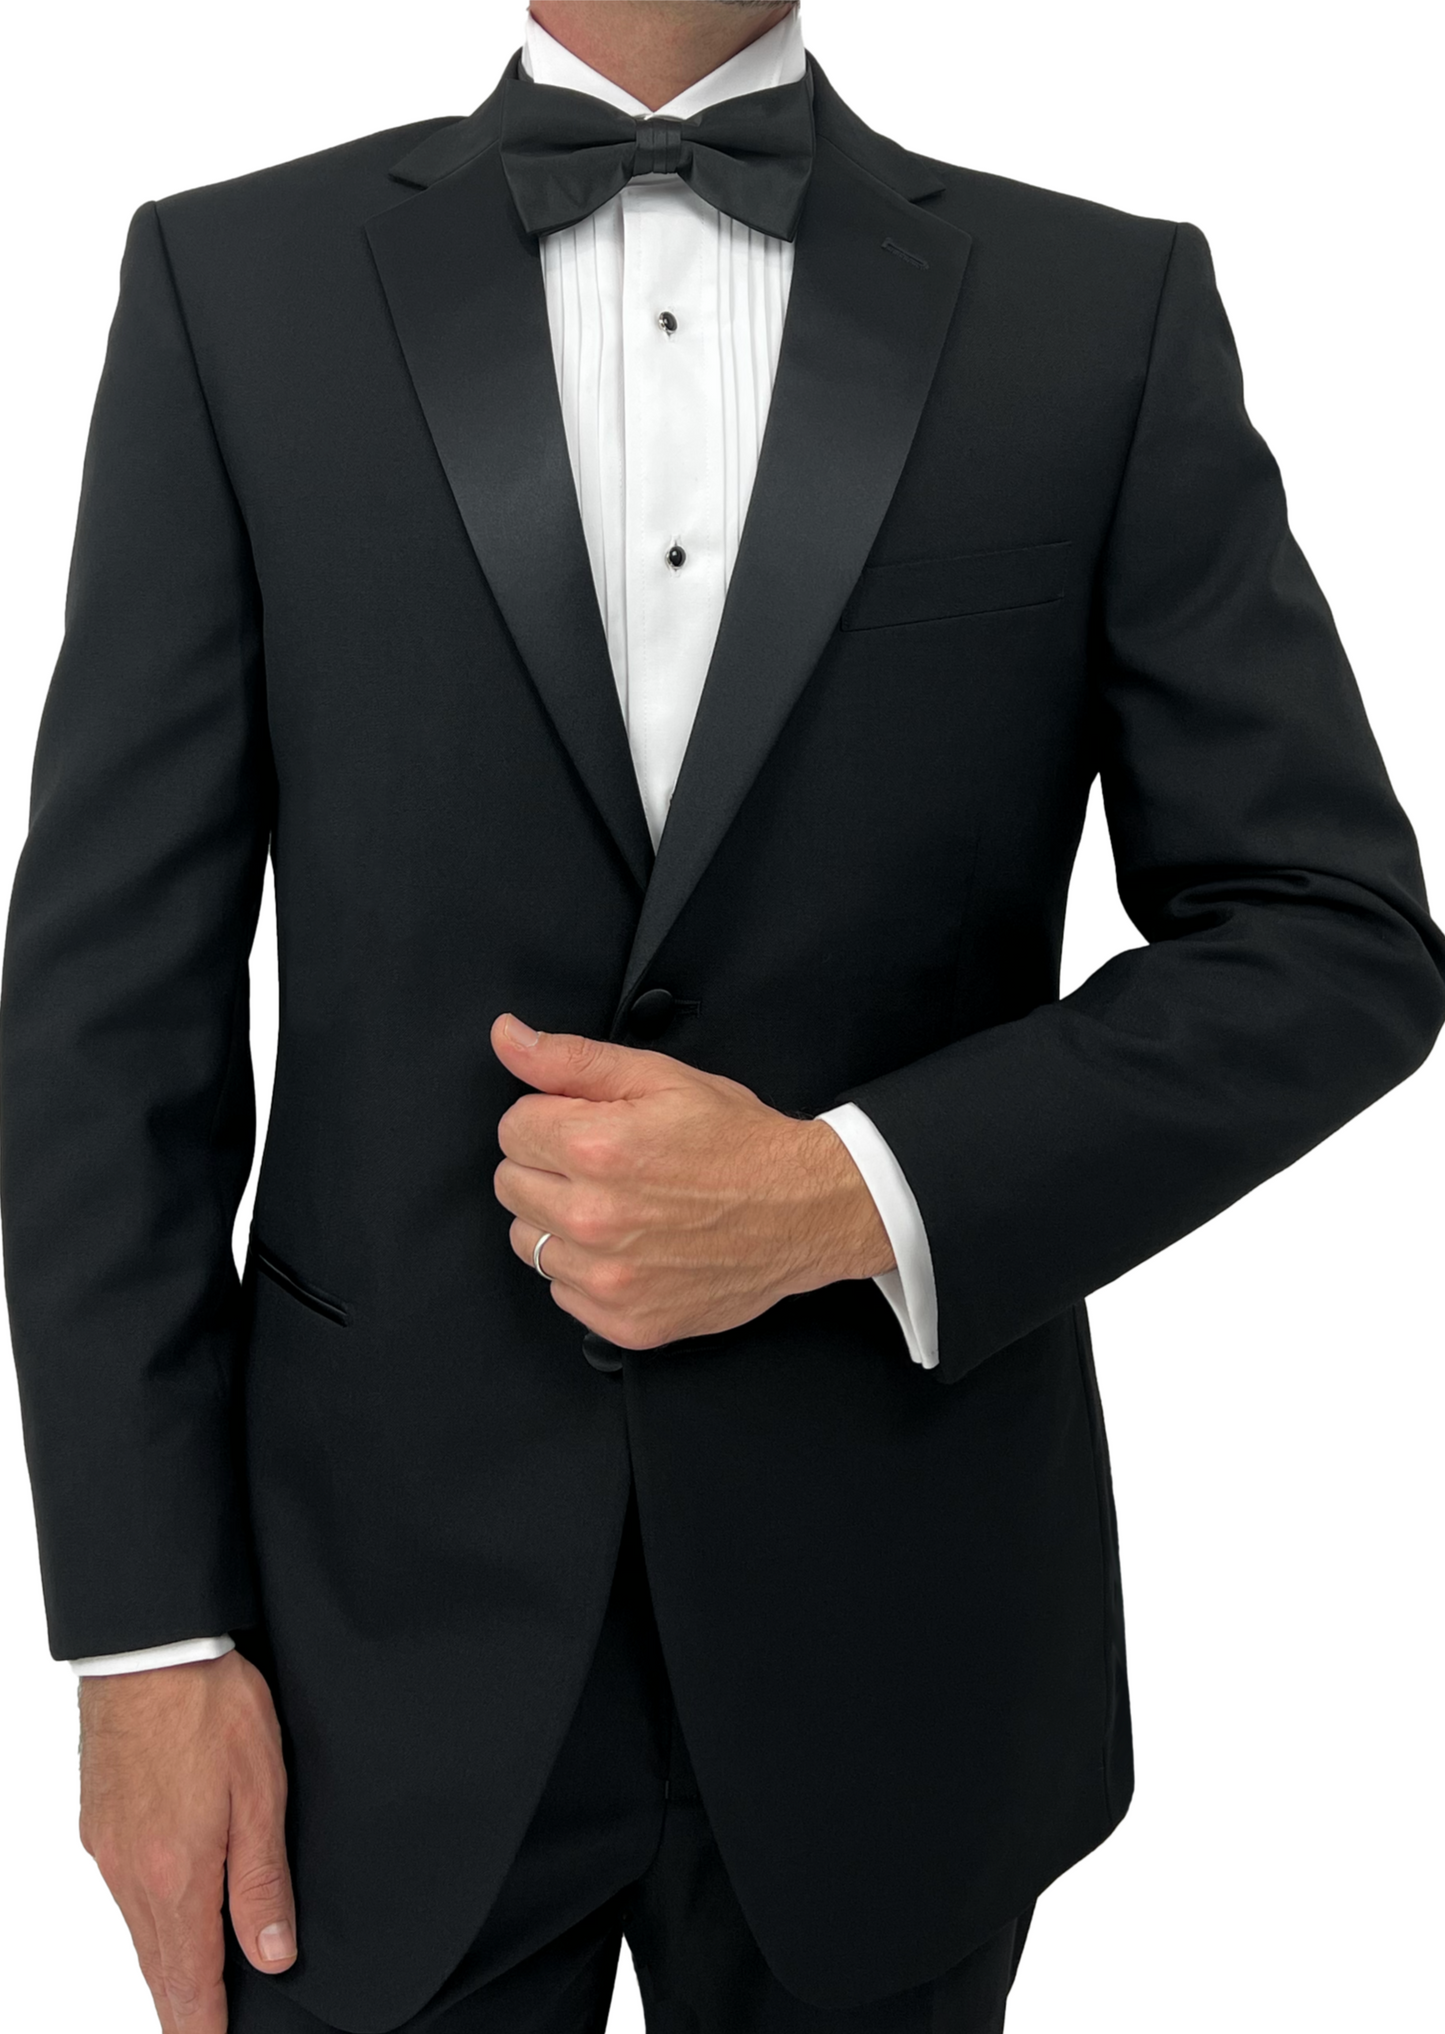 Sir Gregory's Fitted Wool Tuxedo Jacket (Separates) Two-Button Tux Blazer with Satin Notch Lapel